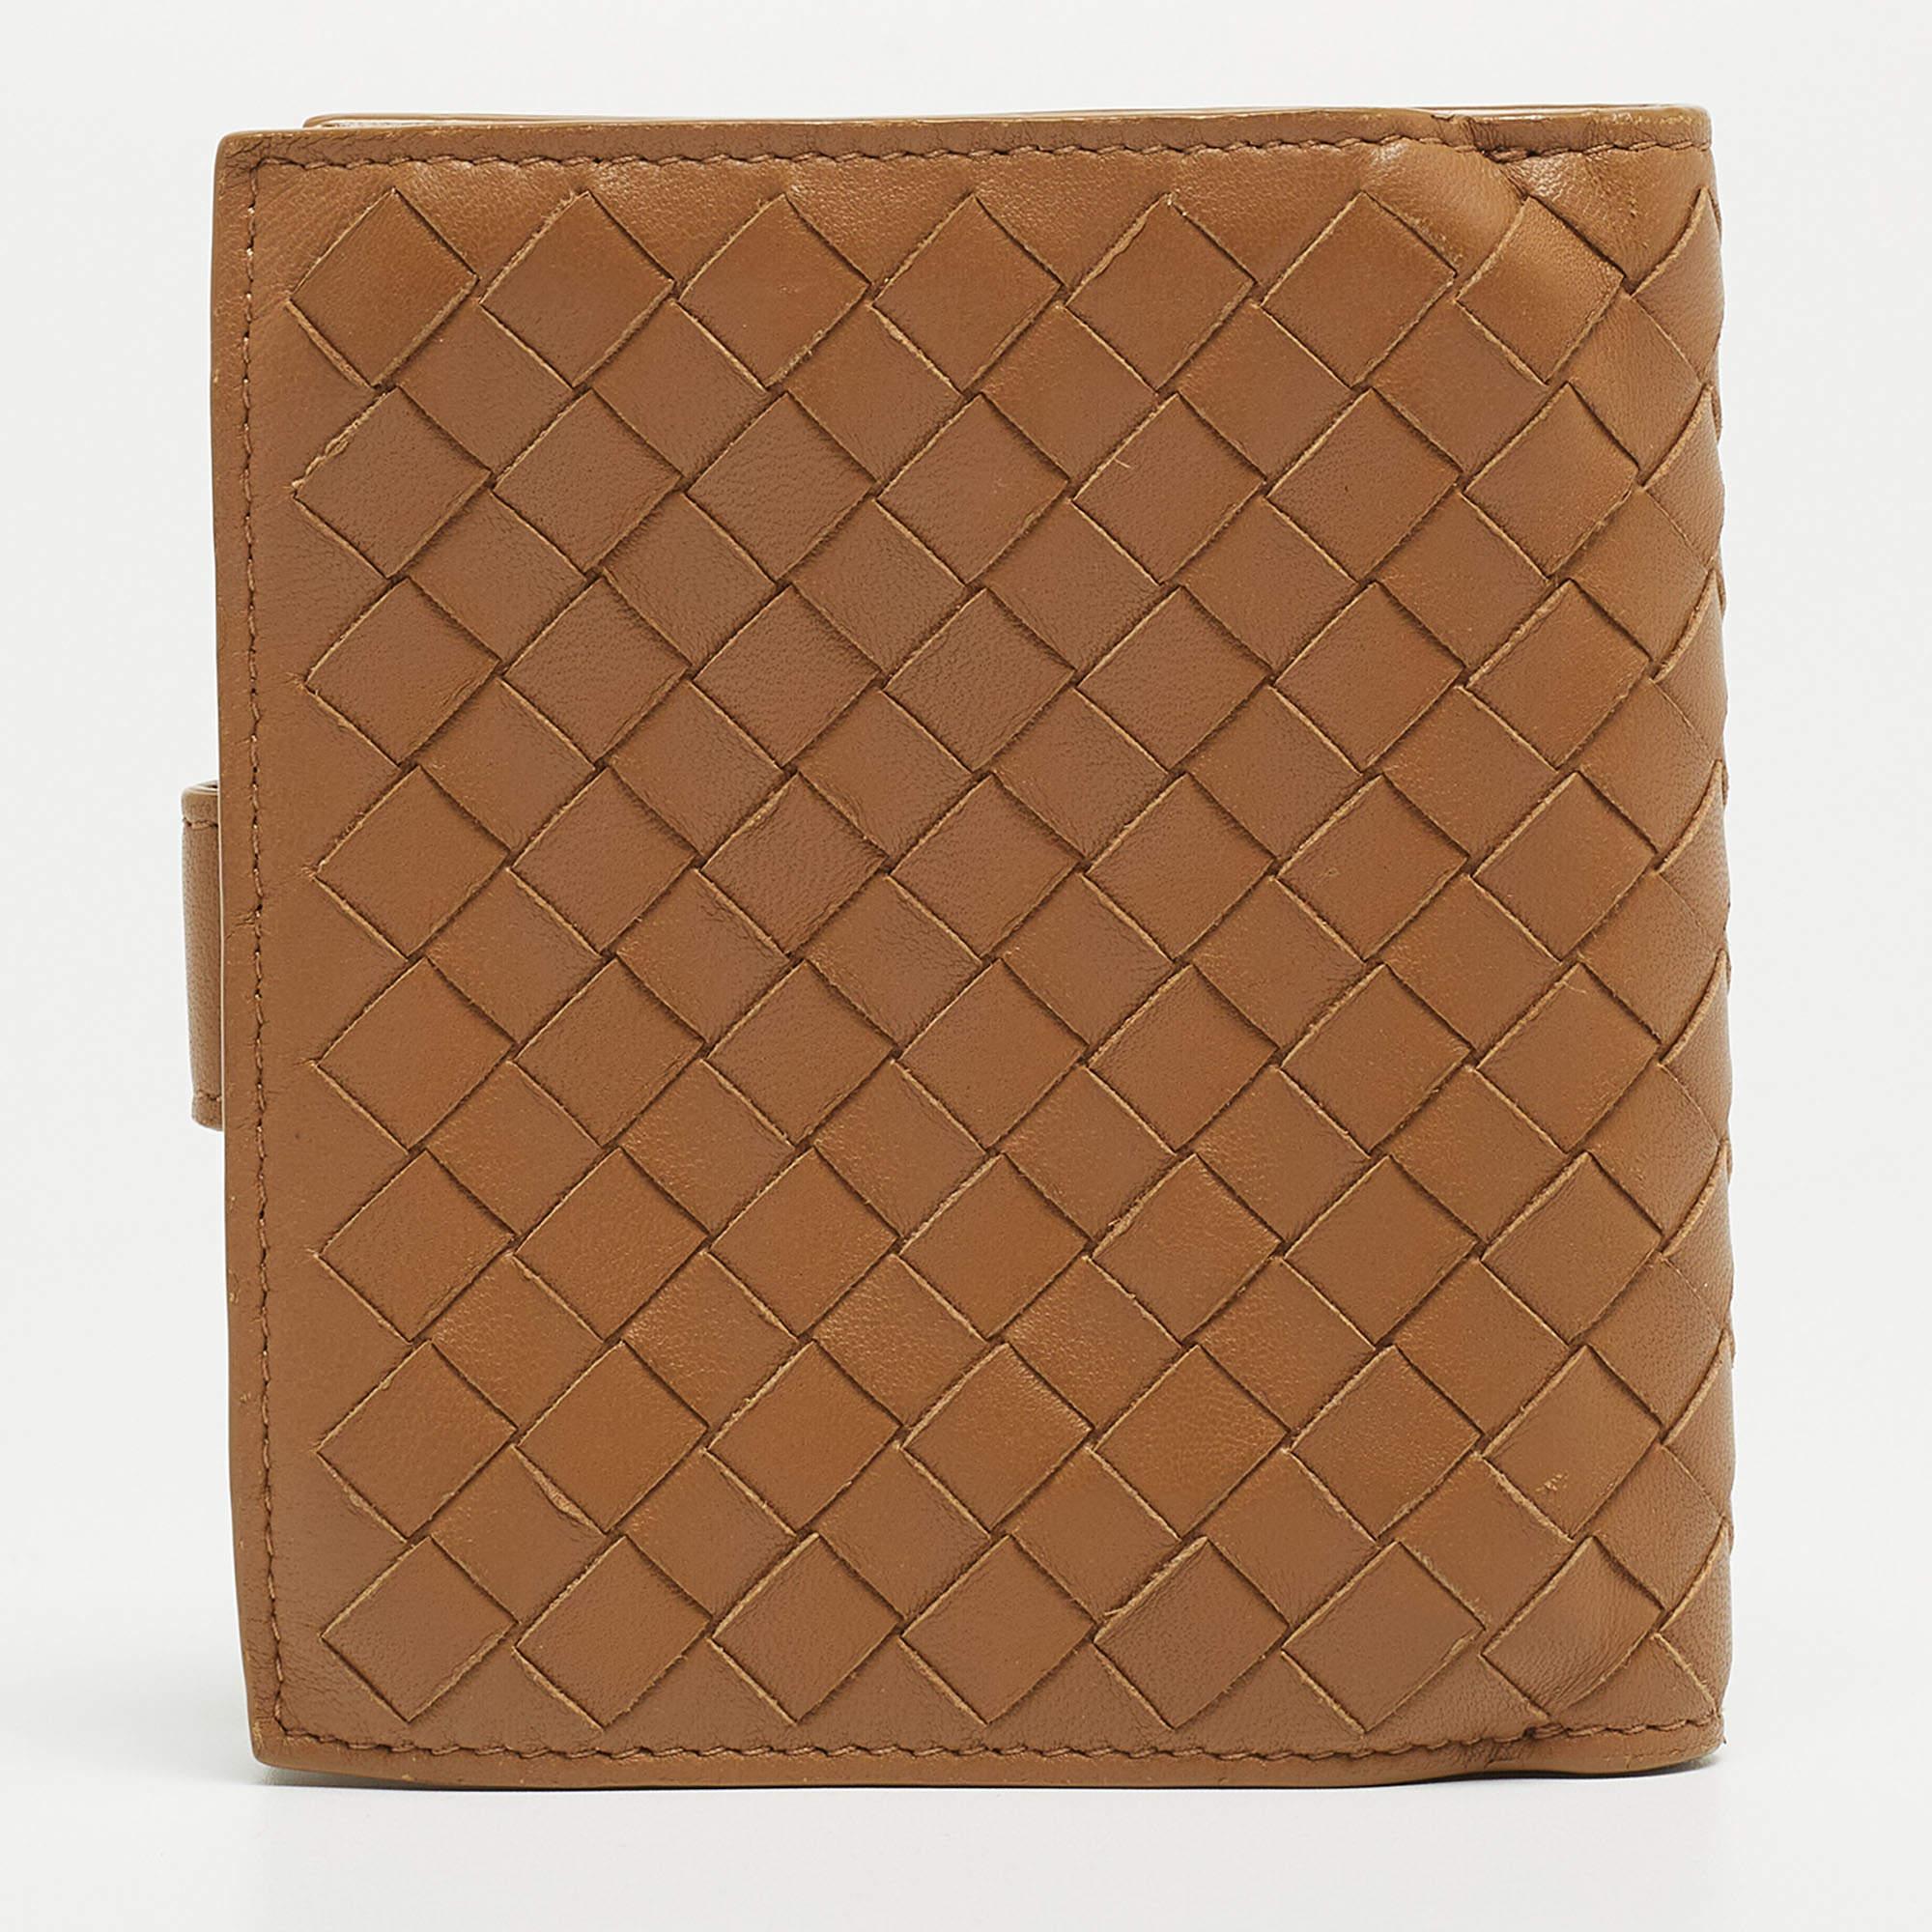 Compact and stylish, this Bottega Veneta wallet will be your favorite grab-and-go companion. Designed from Intrecciato leather, its interior is divided into different compartments to store your cards and cash perfectly.

